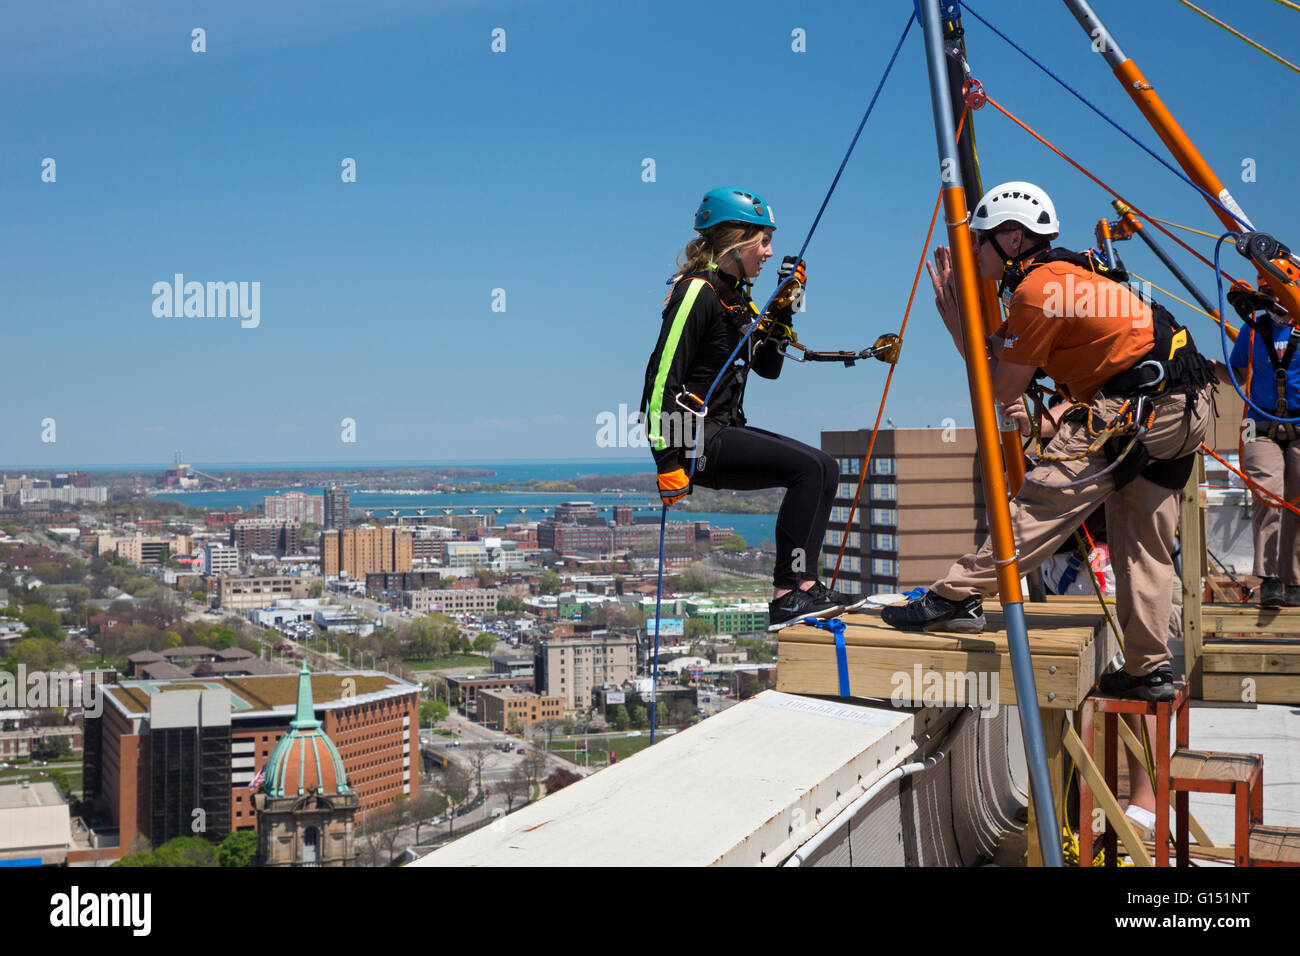 Detroit, Michigan - People rappel down a 25-story building as a fundraiser to benefit charities in Detroit and Nepal. Stock Photo